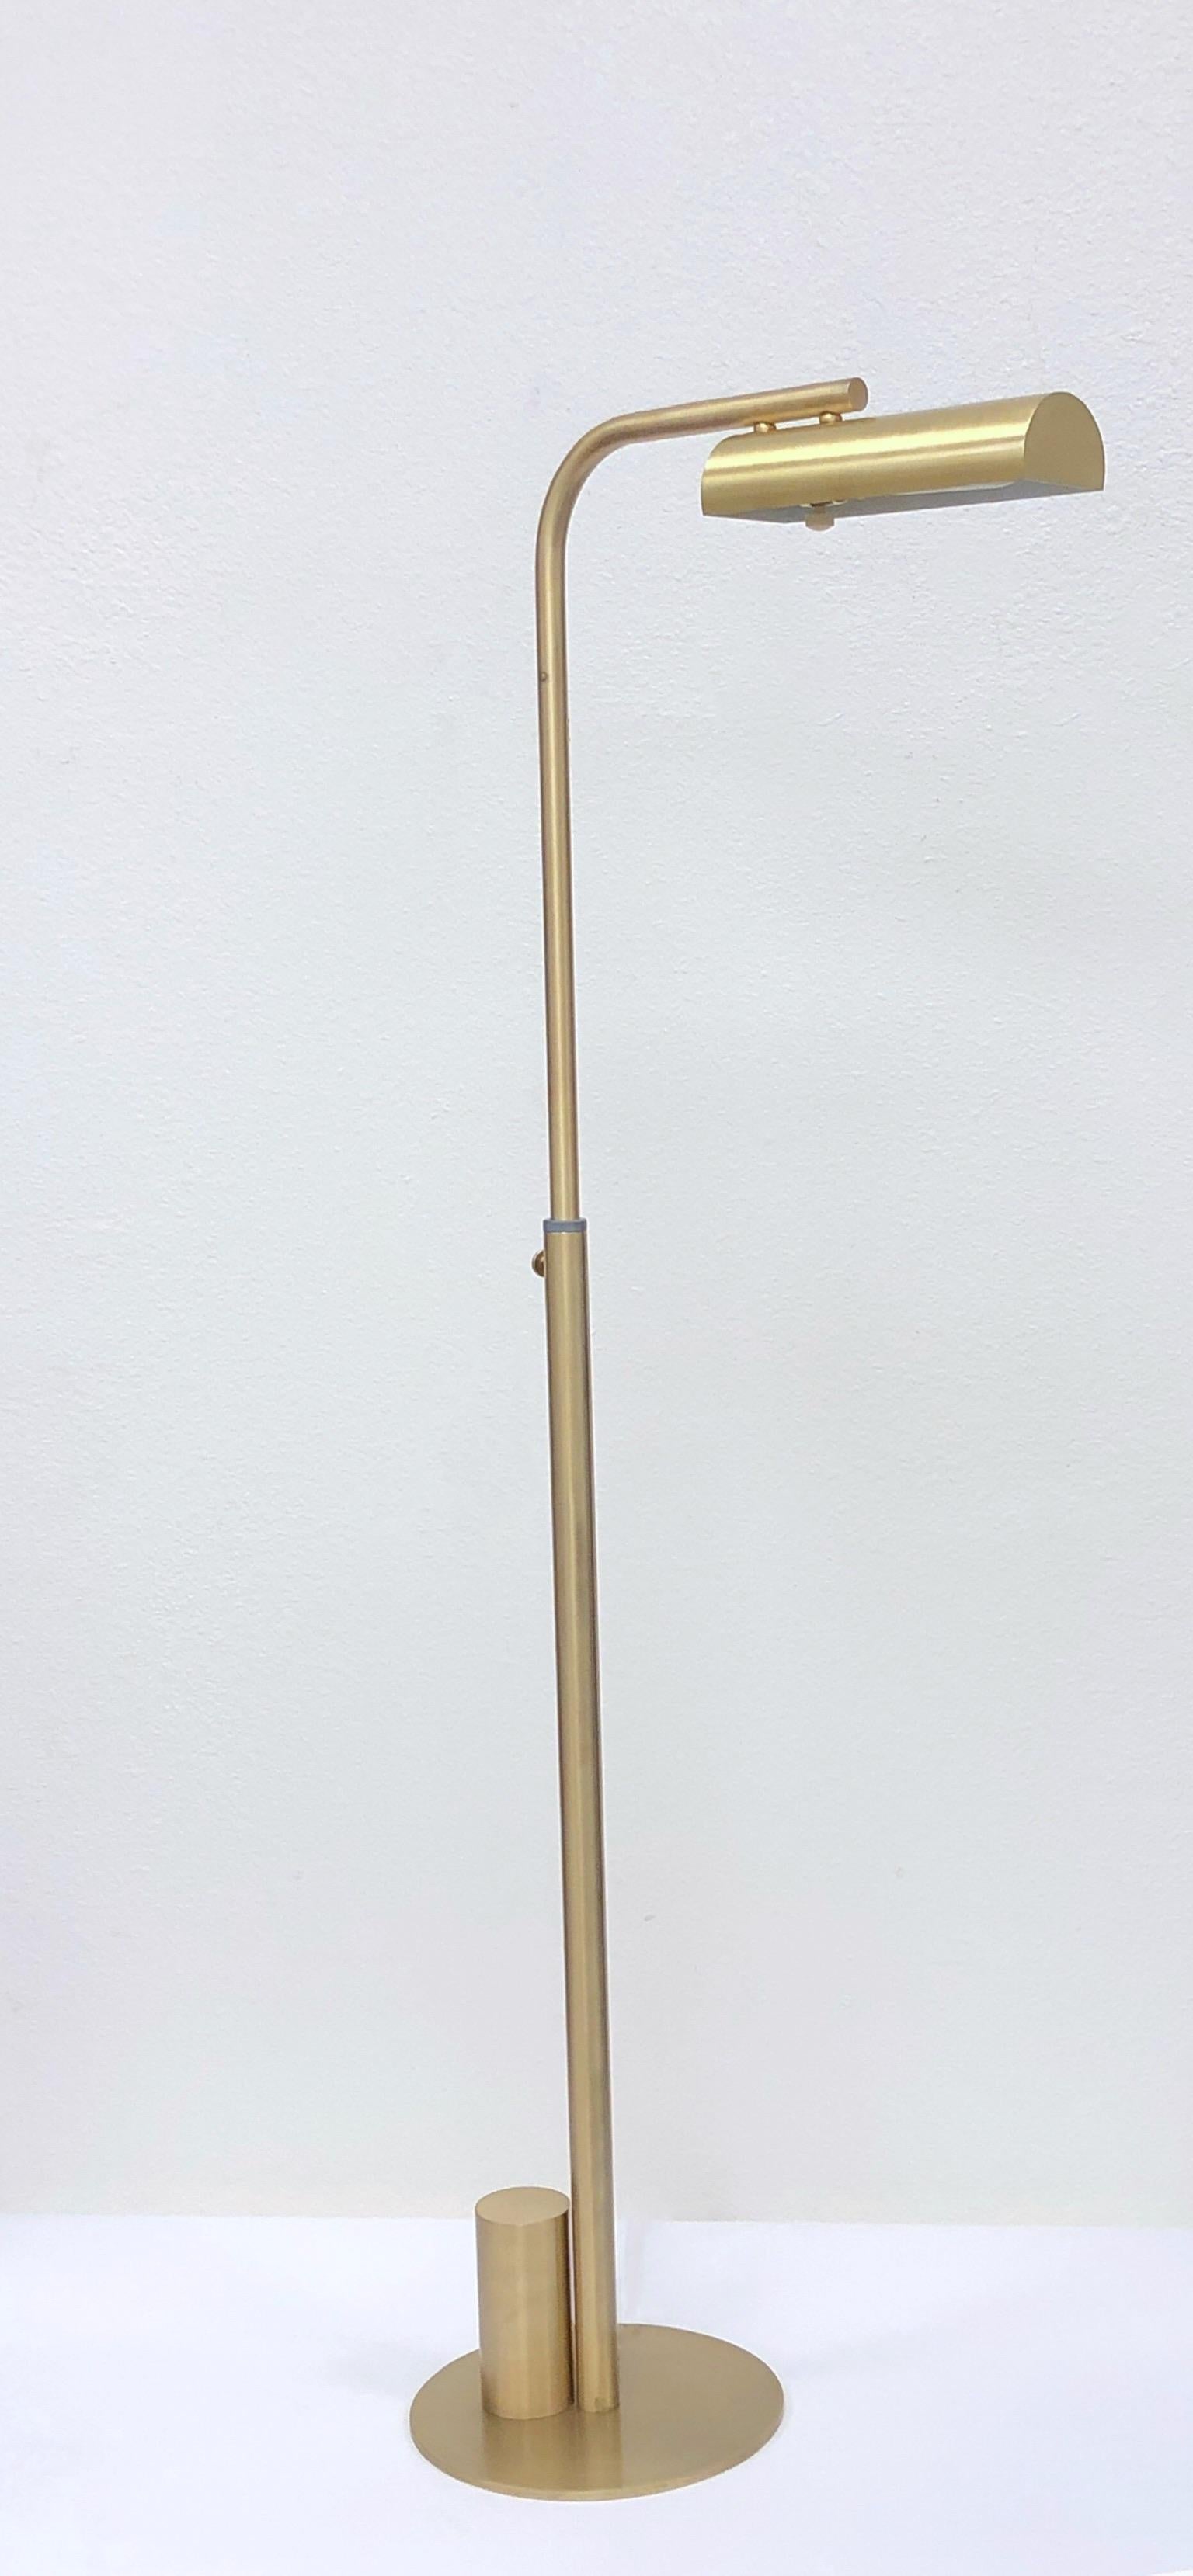 1970’s adjustable satin brass floor lamp designed by Charles Hollis Jones.
It raises, lowers and rotates 360*.
Newly rewired with full range dimmer. 75w Max. 
 Measurements: 16.25” Wide 9.75” Deep 50” High as shown.
 